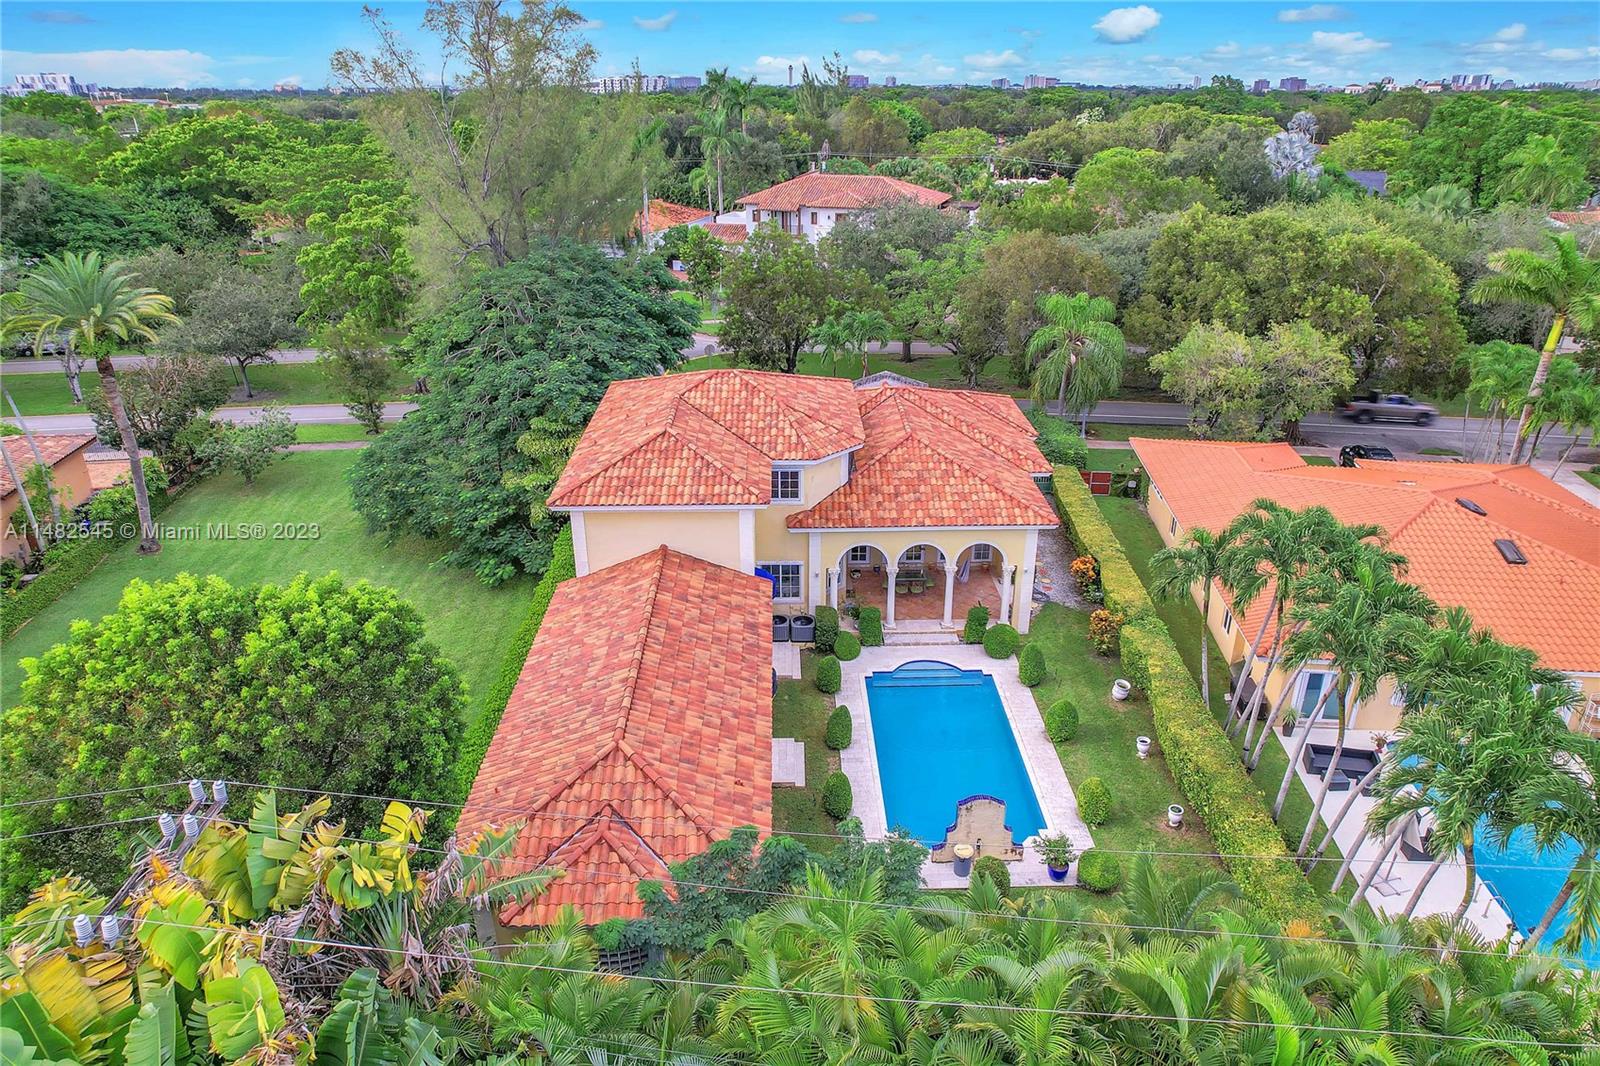 Recently Reduced! Nestled in the heart of Coral Gables, this exquisite 5 bedroom, 5 bathroom estate offers an unparalleled blend of Location, Luxury, Lifestyle and Elegance! Beautiful Mediterranean style estate offers lush landscaped garden, a sparkling pool, and a spacious patio area, making it perfect for entertaining. Embrace the opportunity to own a piece of paradise in South Florida's jewel, Coral Gables, offering top rated schools, fine dinning, and exclusive shopping.